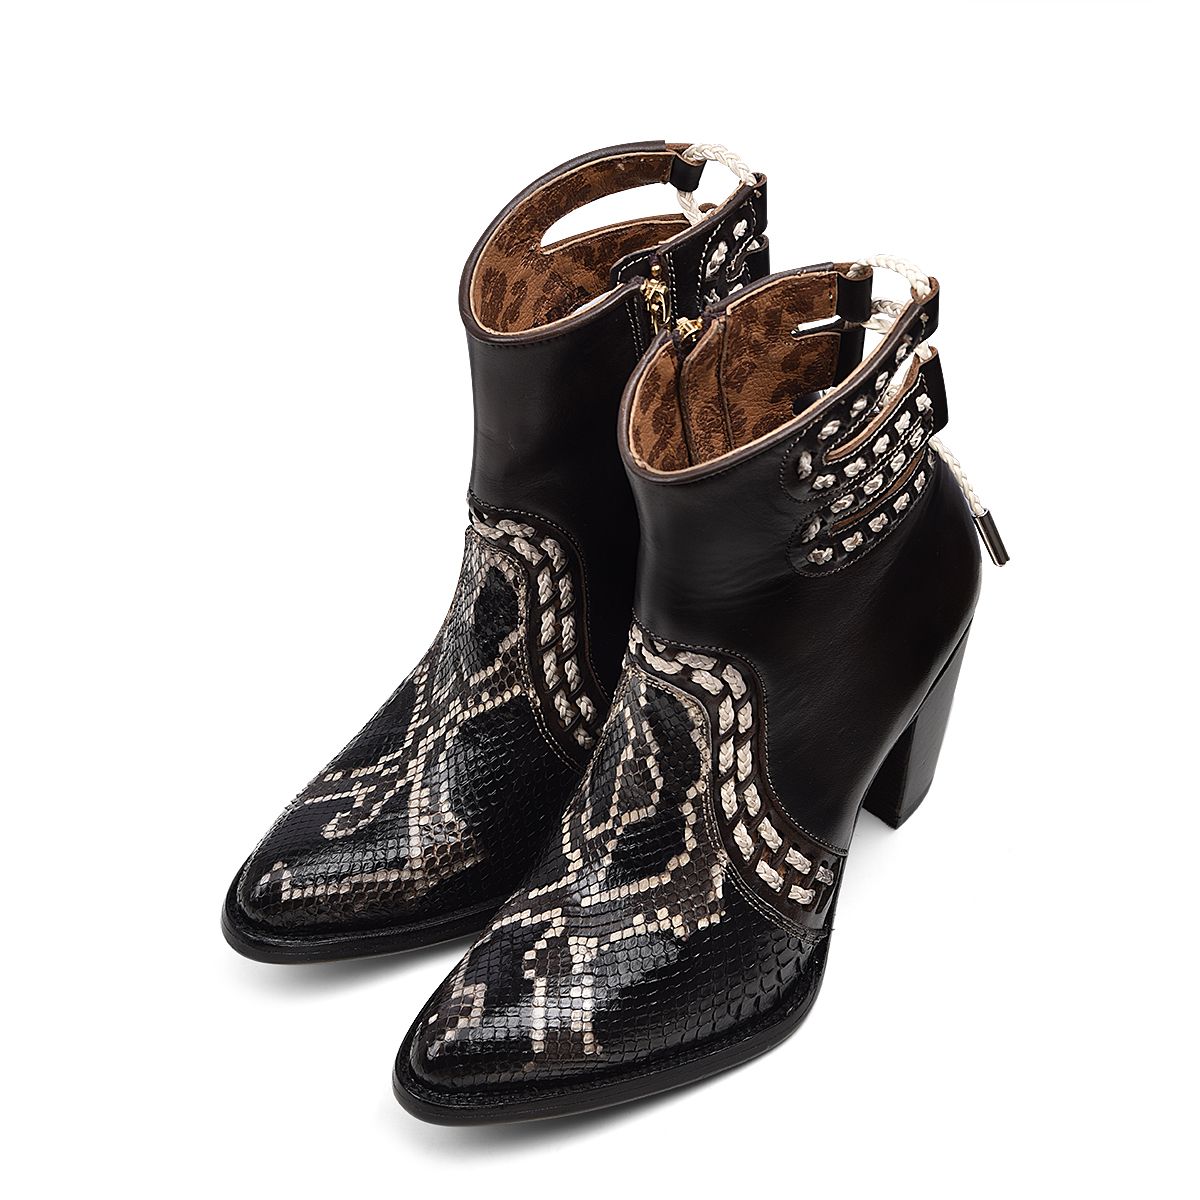 3F93PH - Cuadra black fashion phyton leather ankle boots for women.-Kuet.us